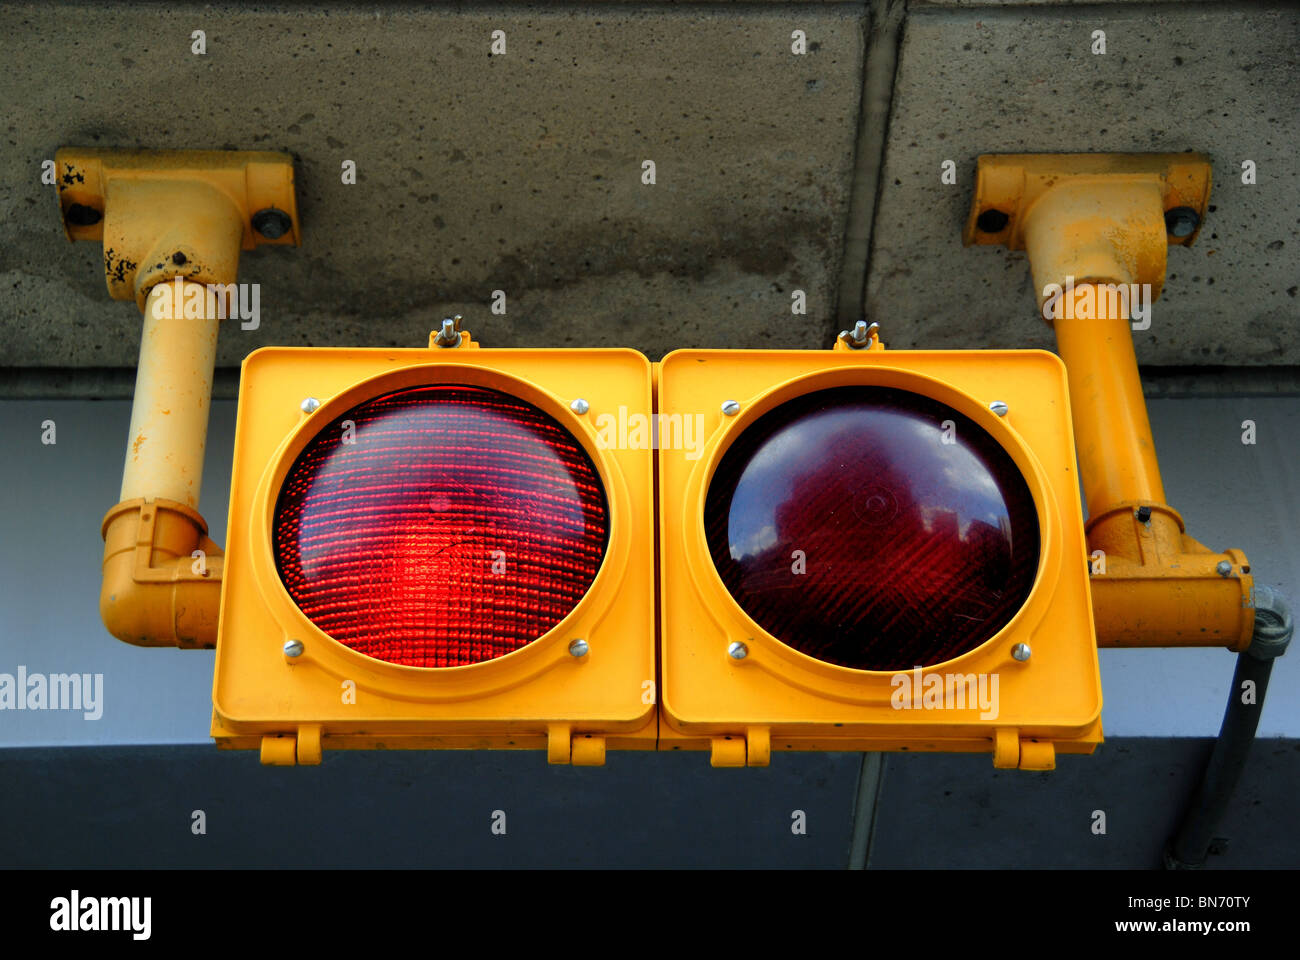 A traffic light at a parking garage is illuminated red, for stop. Stock Photo